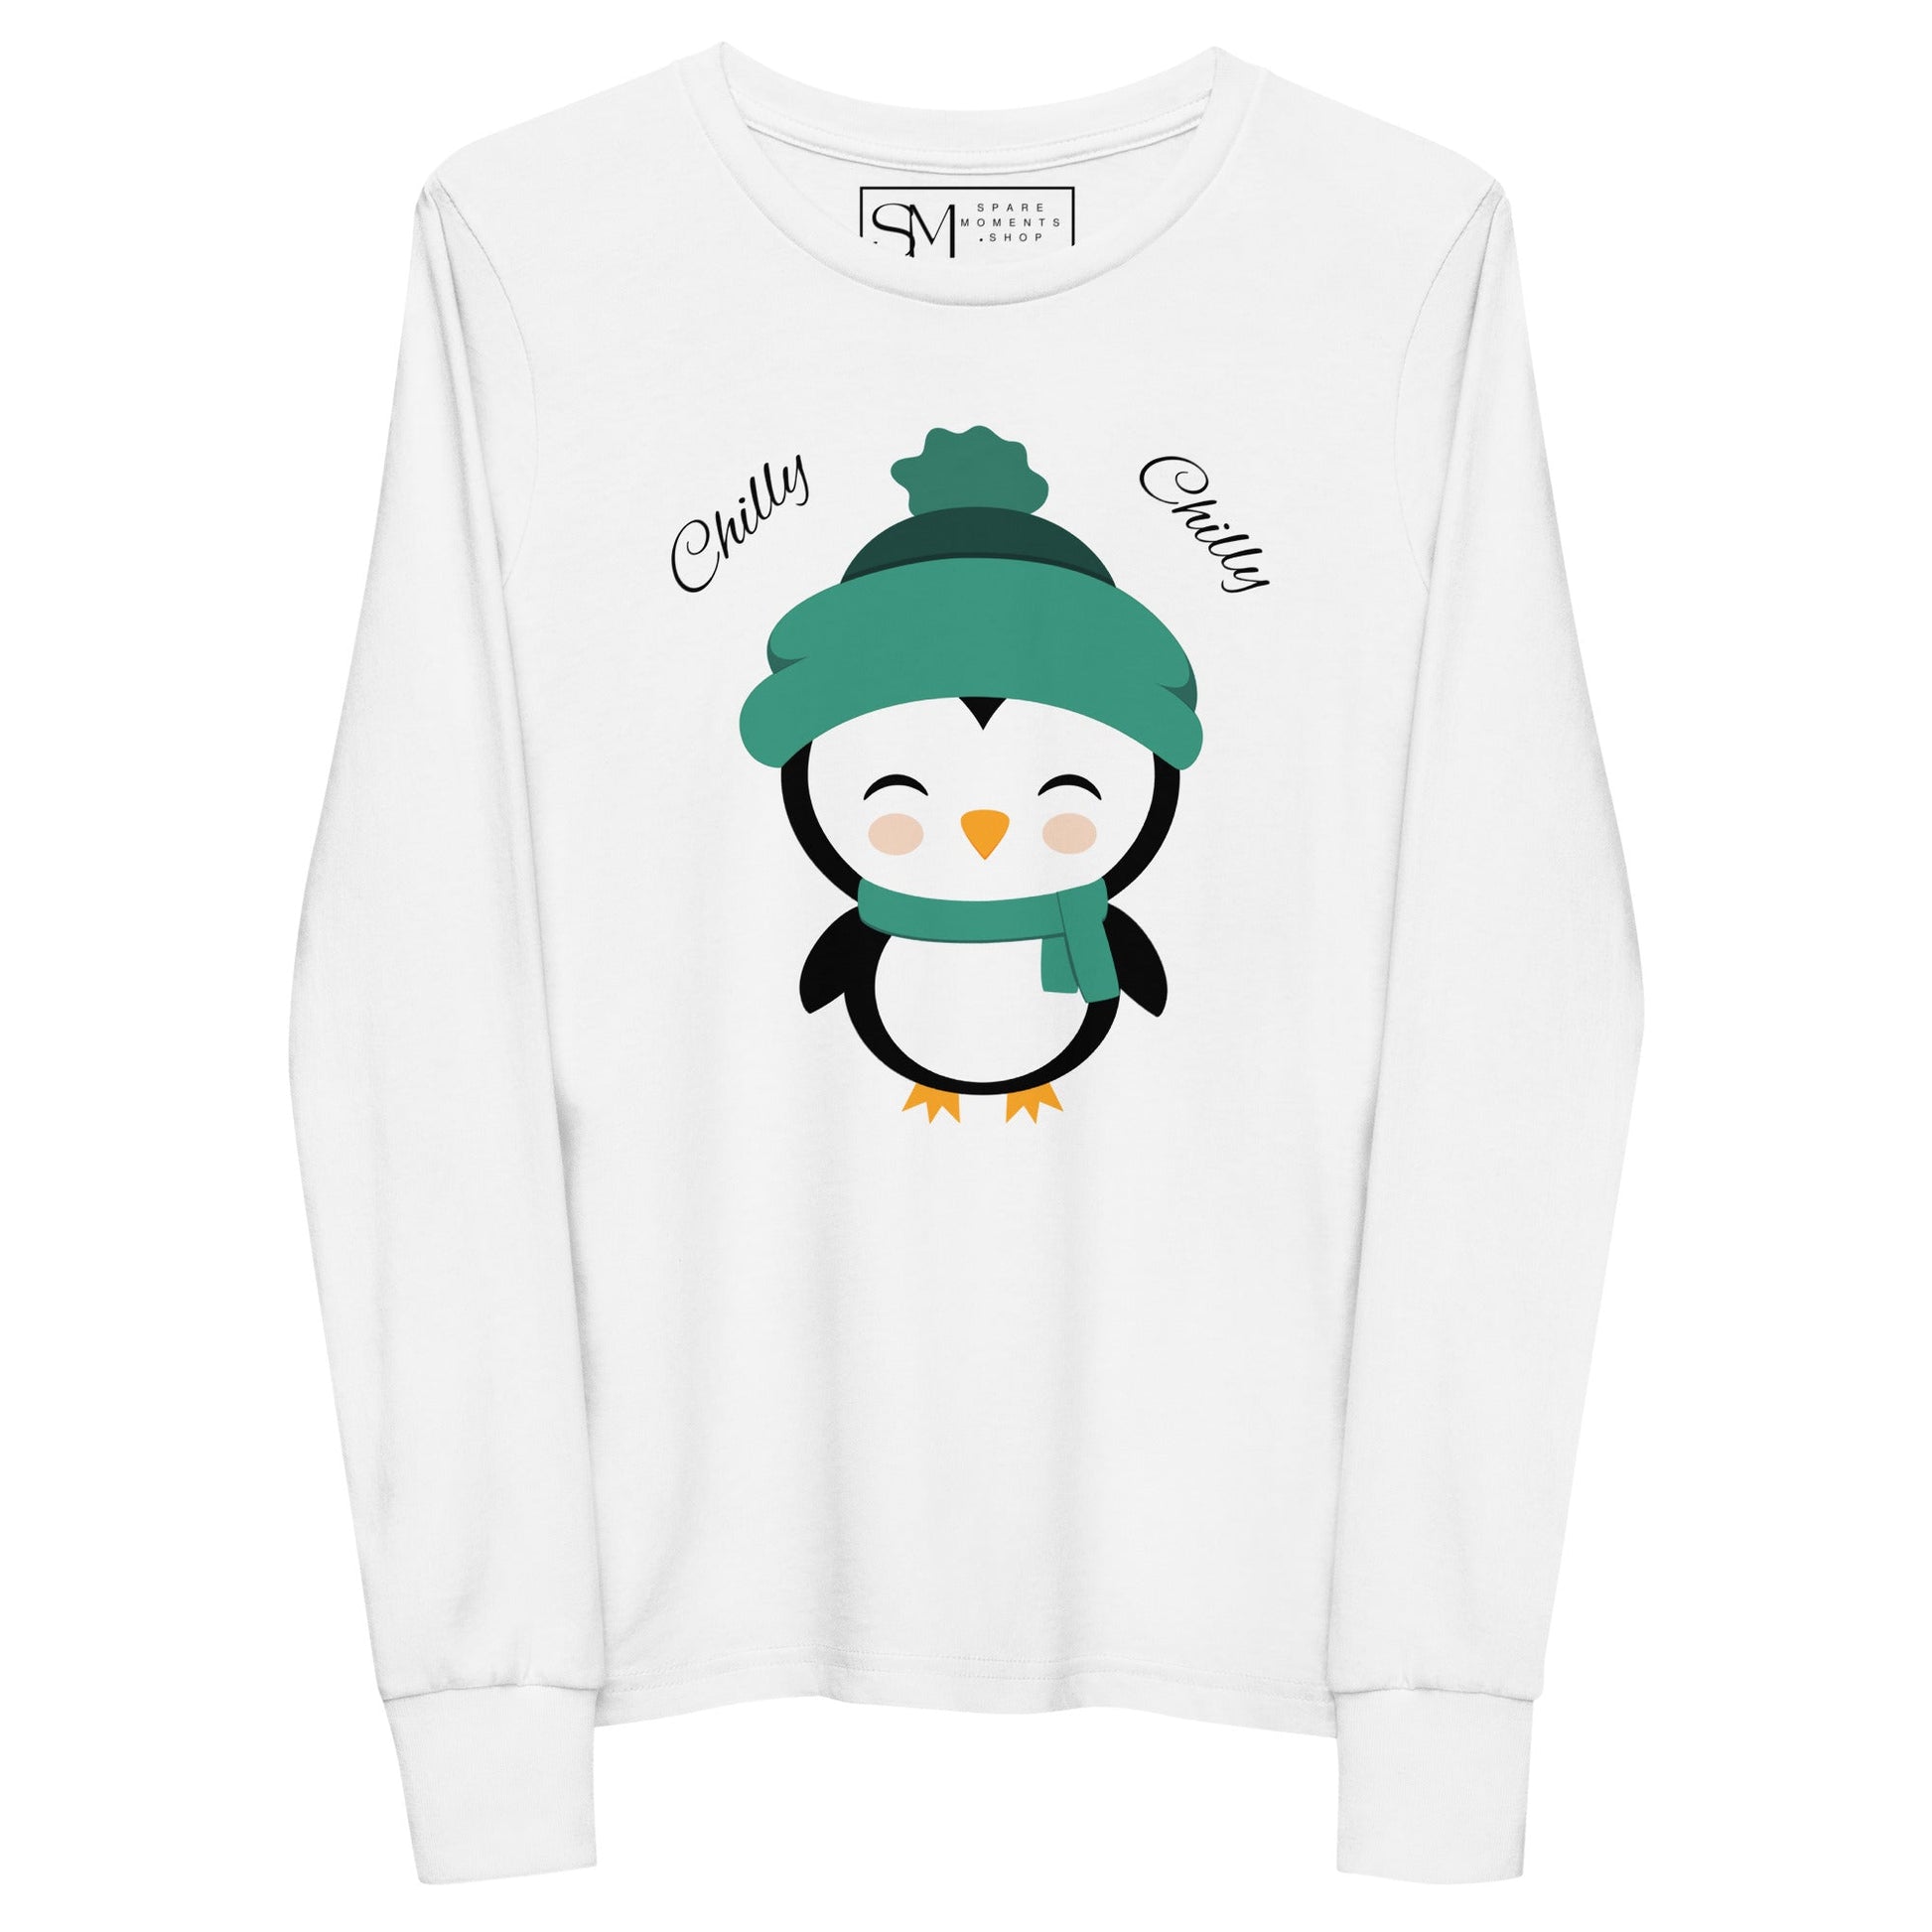 Chilly Chilly Penguin | Youth long sleeve tee